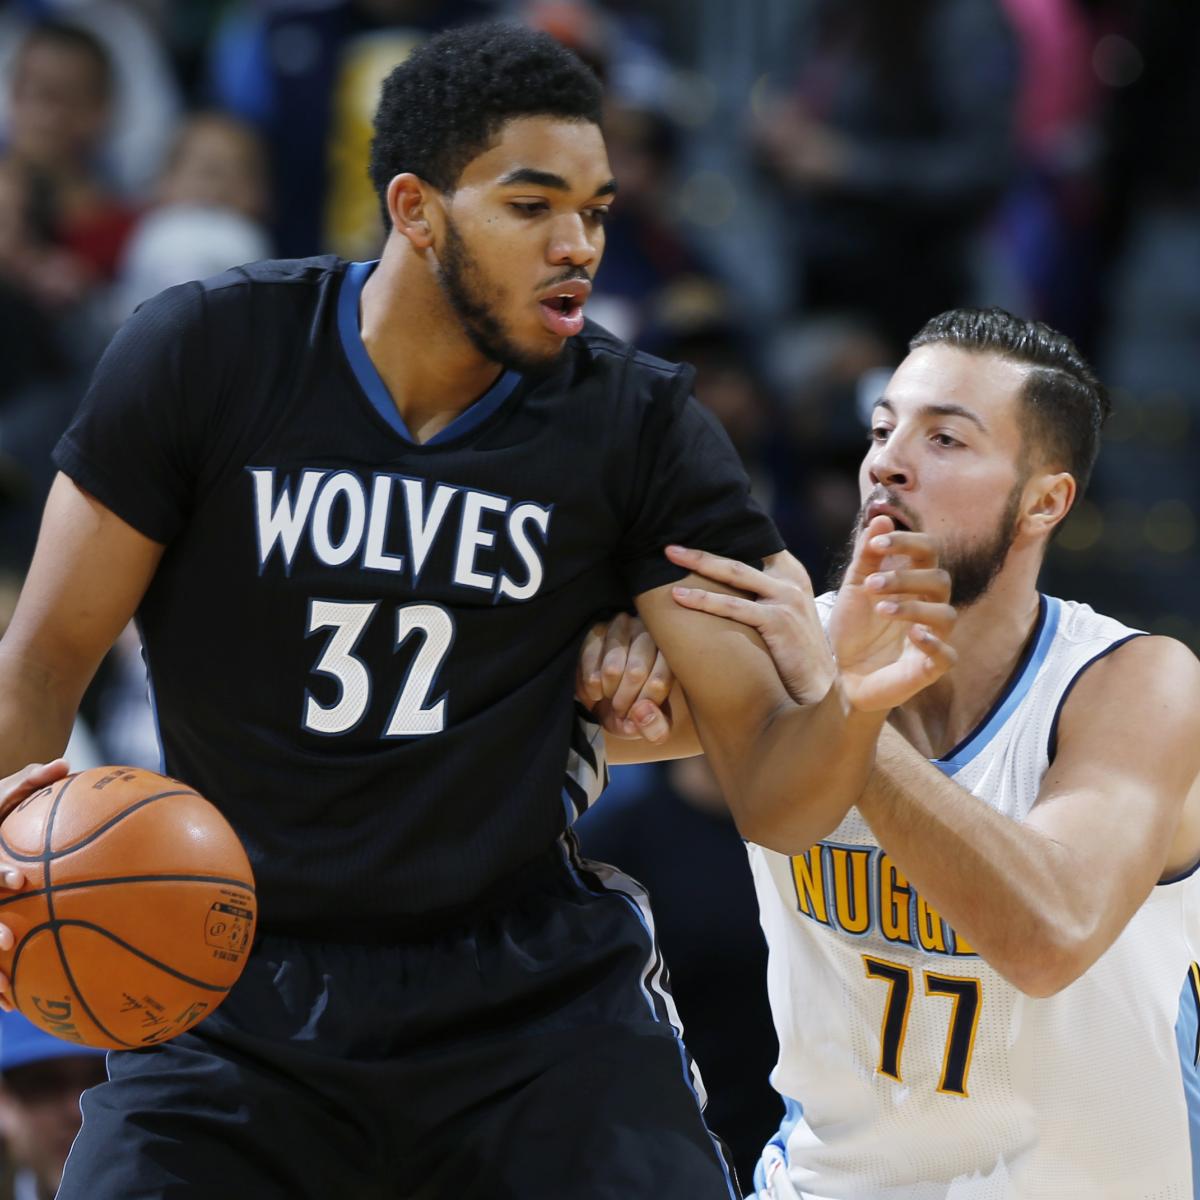 Timberwolves vs. Nuggets Score, Video Highlights and Recap from Oct